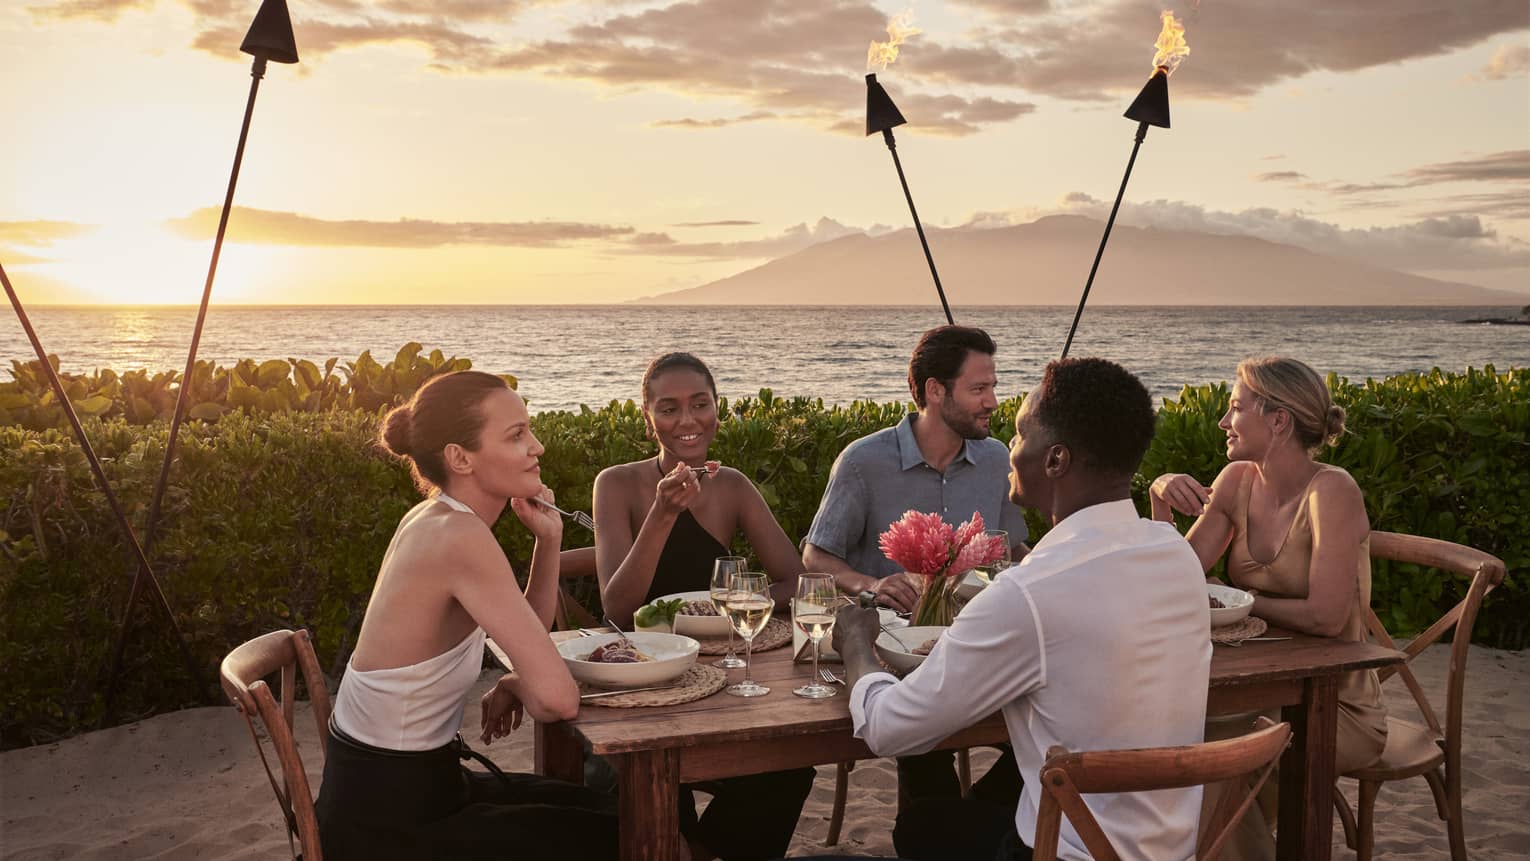 Three women and two men at table on beach, surrounded by tiki torches